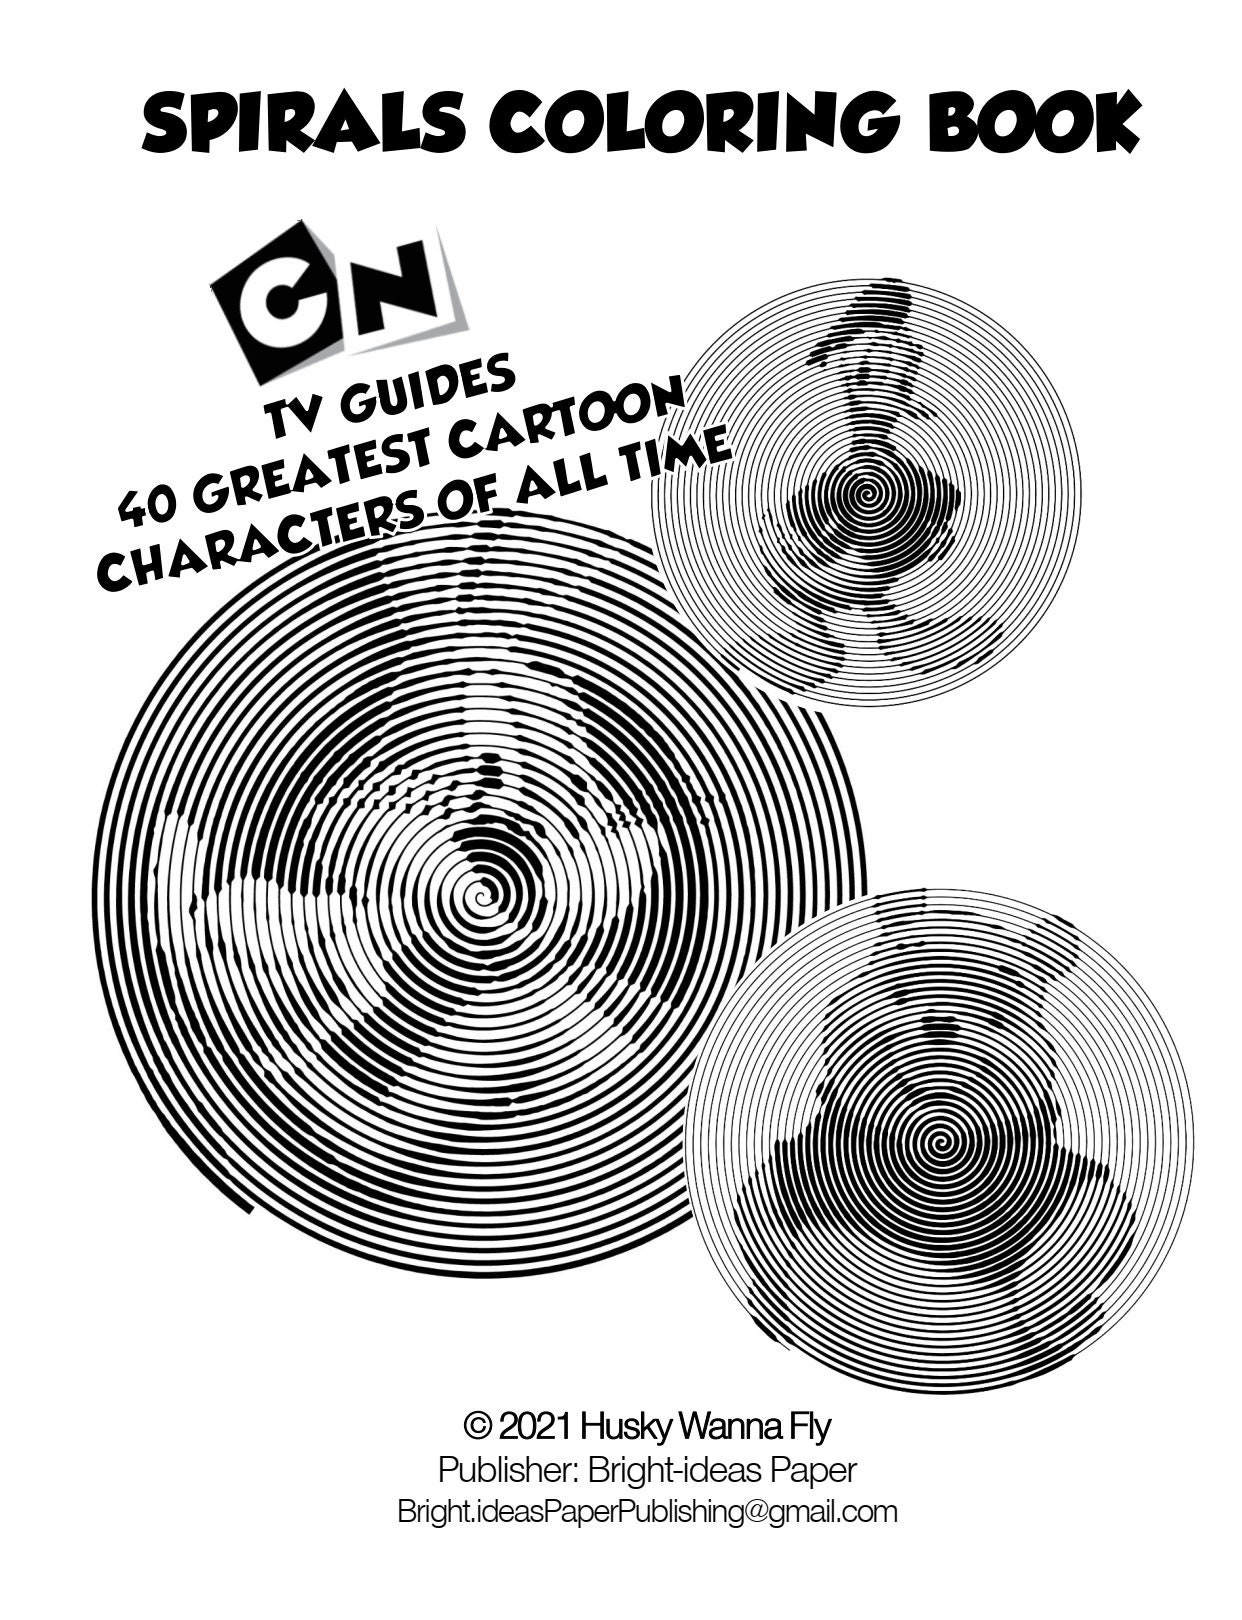 TV Guides 40 Greatest Cartoon Characters of All Time Spiral Coloring Pages  